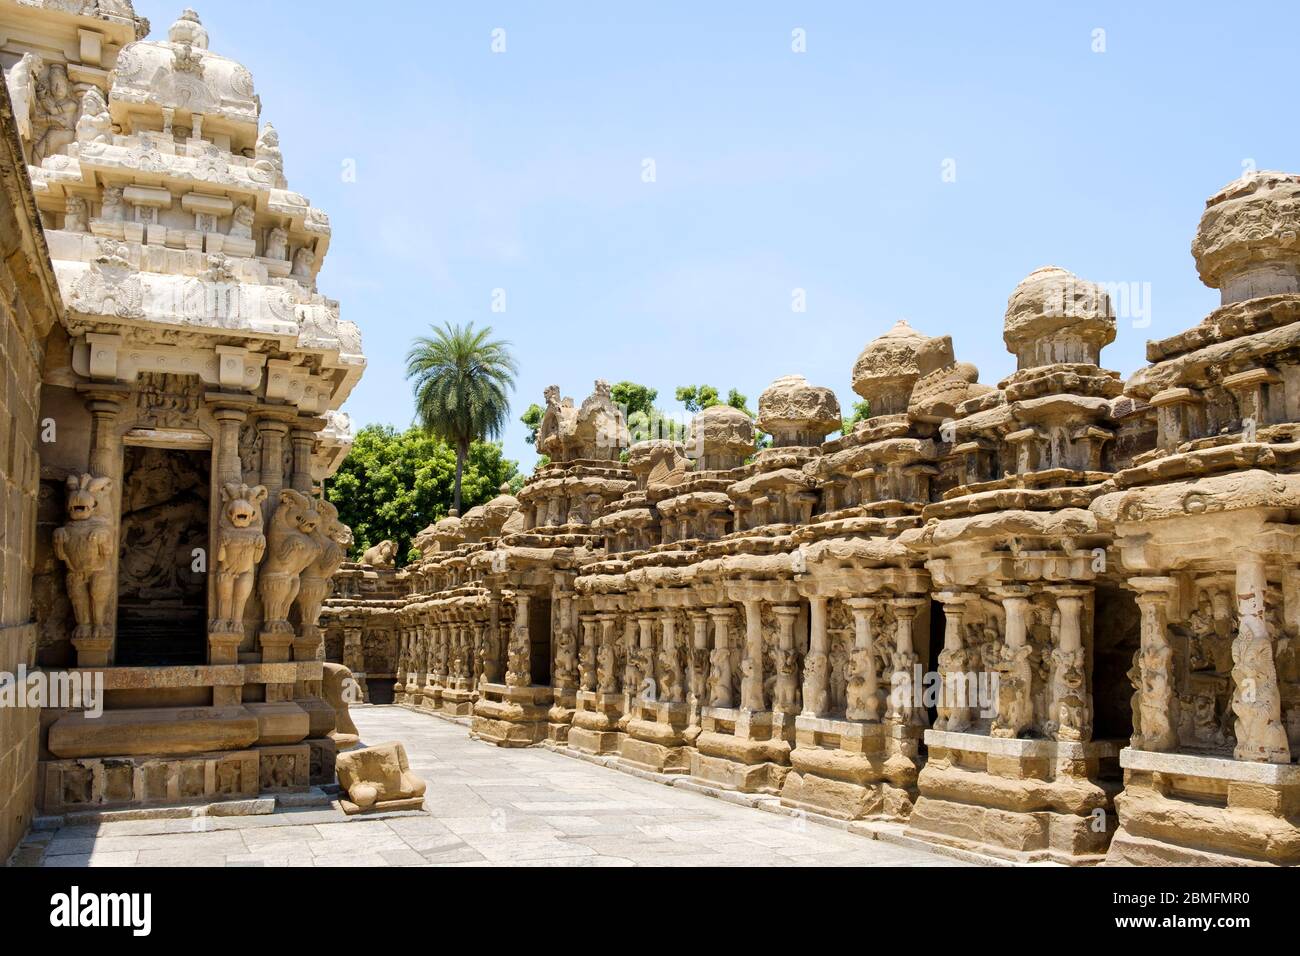 Stone-carved sculptures and niches on sanctuary and circumambulatory passage inner walls of Kailasanathar Temple, Kanchipuram, Tamil Nadu, India. Stock Photo